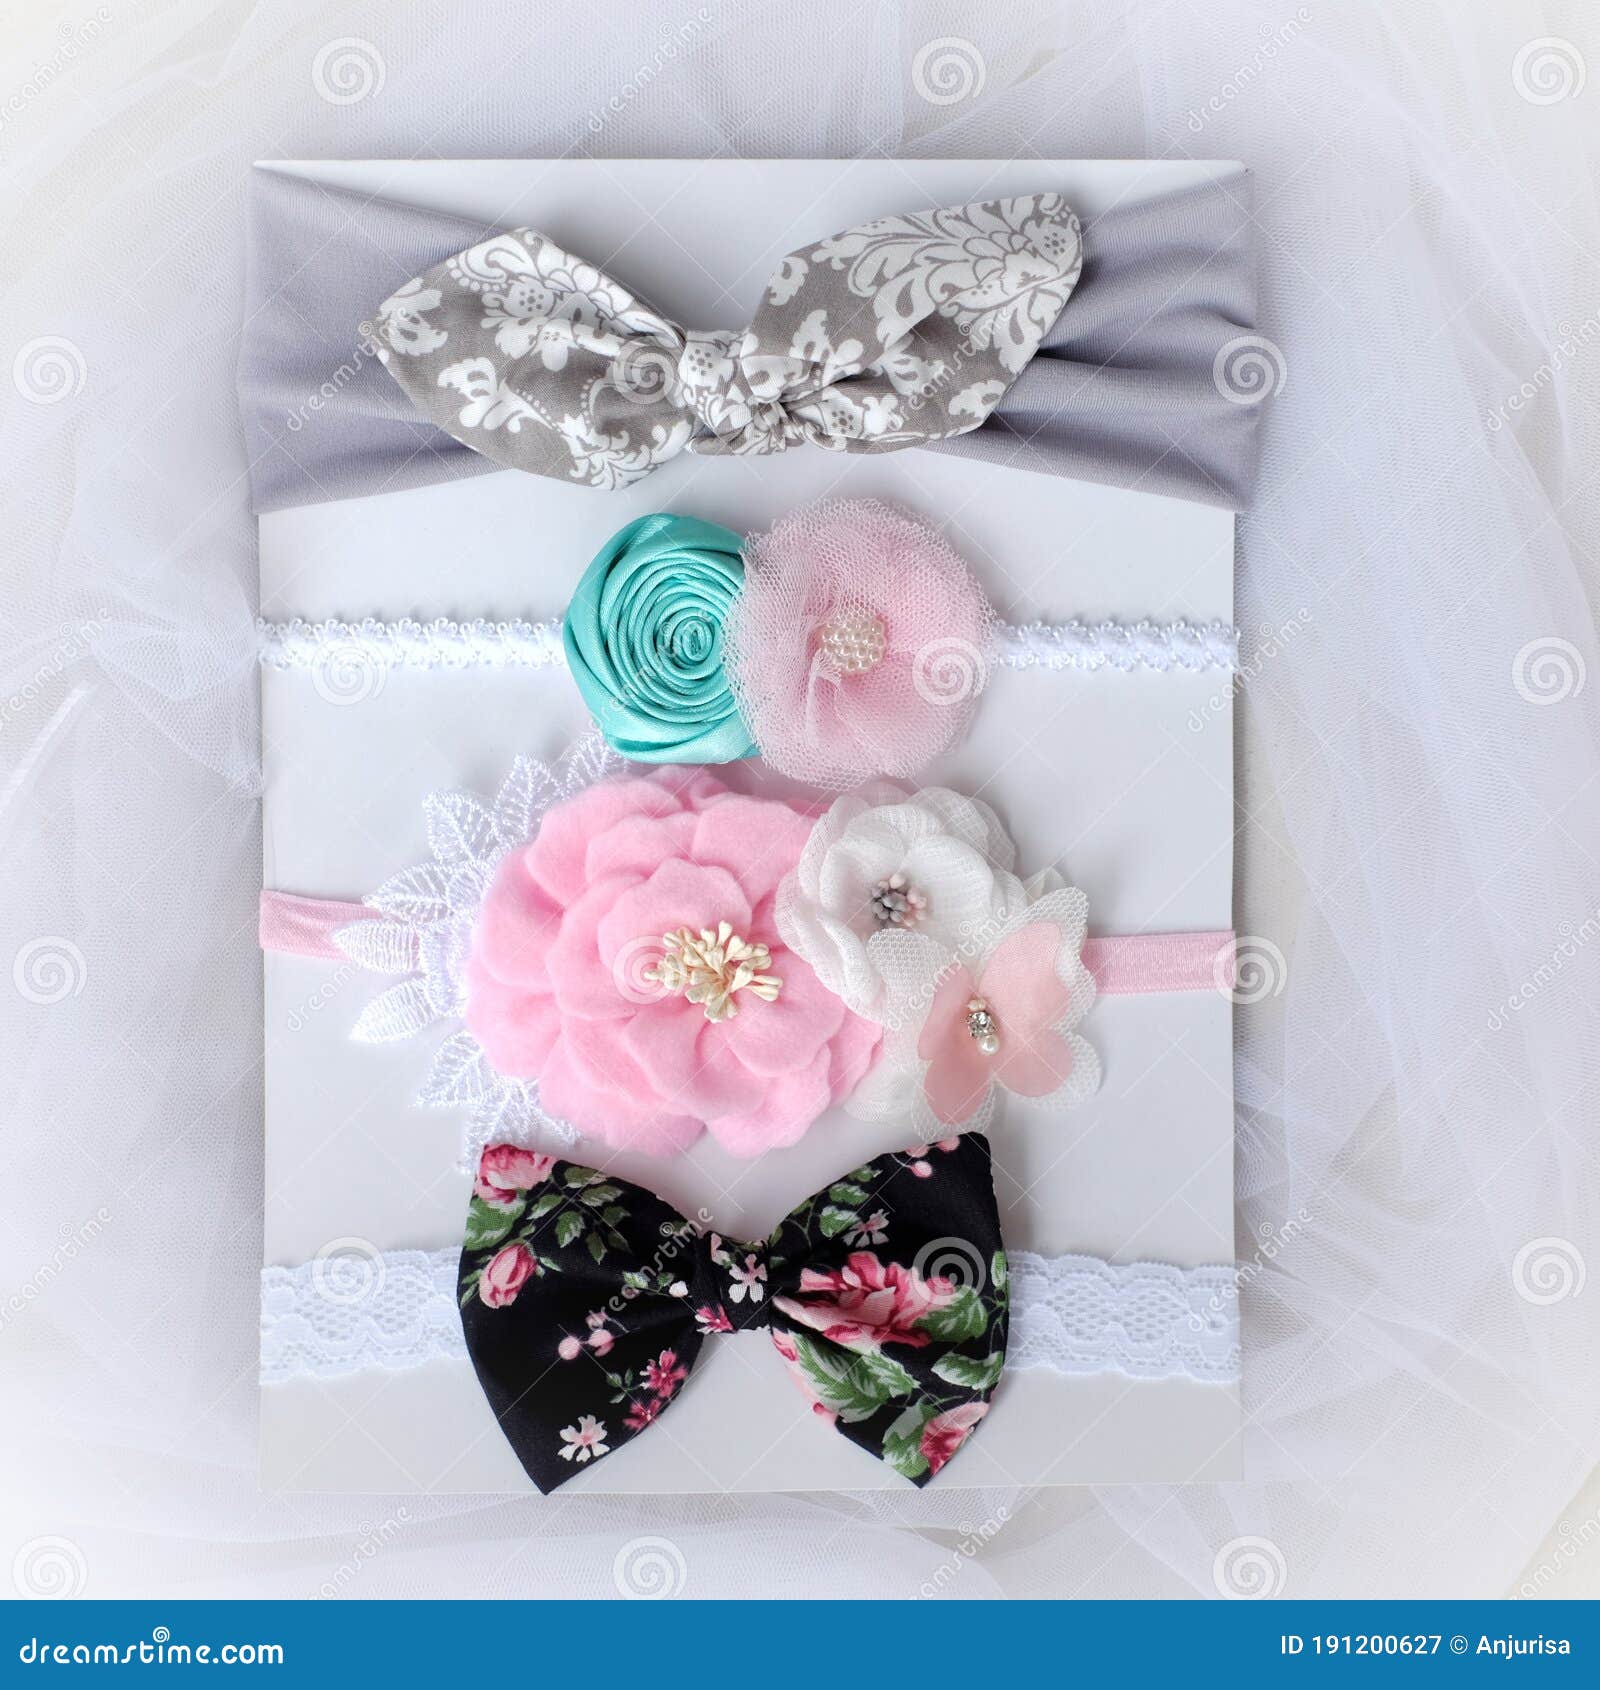 Four Pieces of Handmade Hair Accessories with Unique Design Placed on White  Tulle Fabric Stock Image - Image of color, bouquet: 191200627